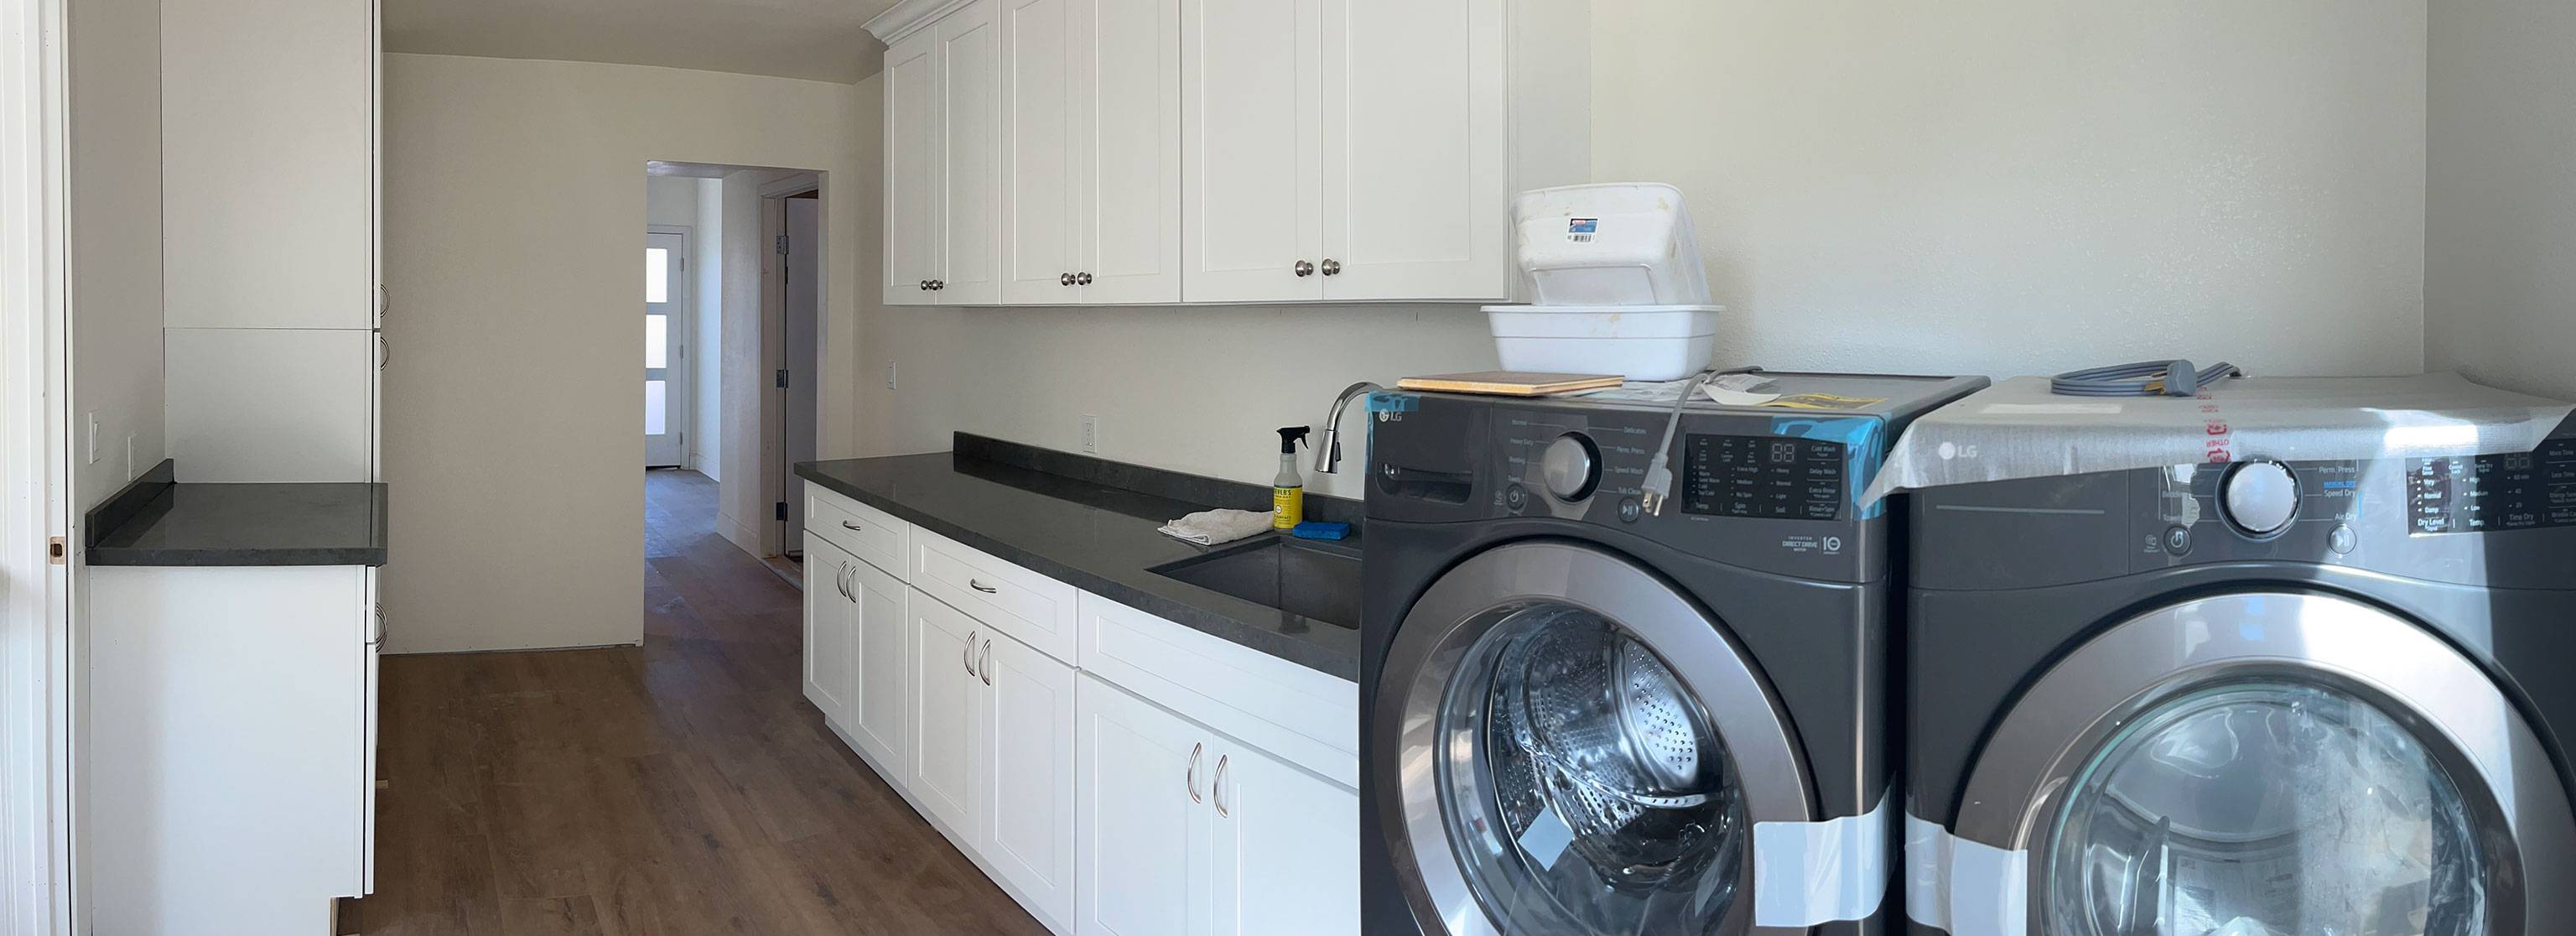 Laundry room nearing completion custom cabinets floor-to-ceiling black marble countertops.